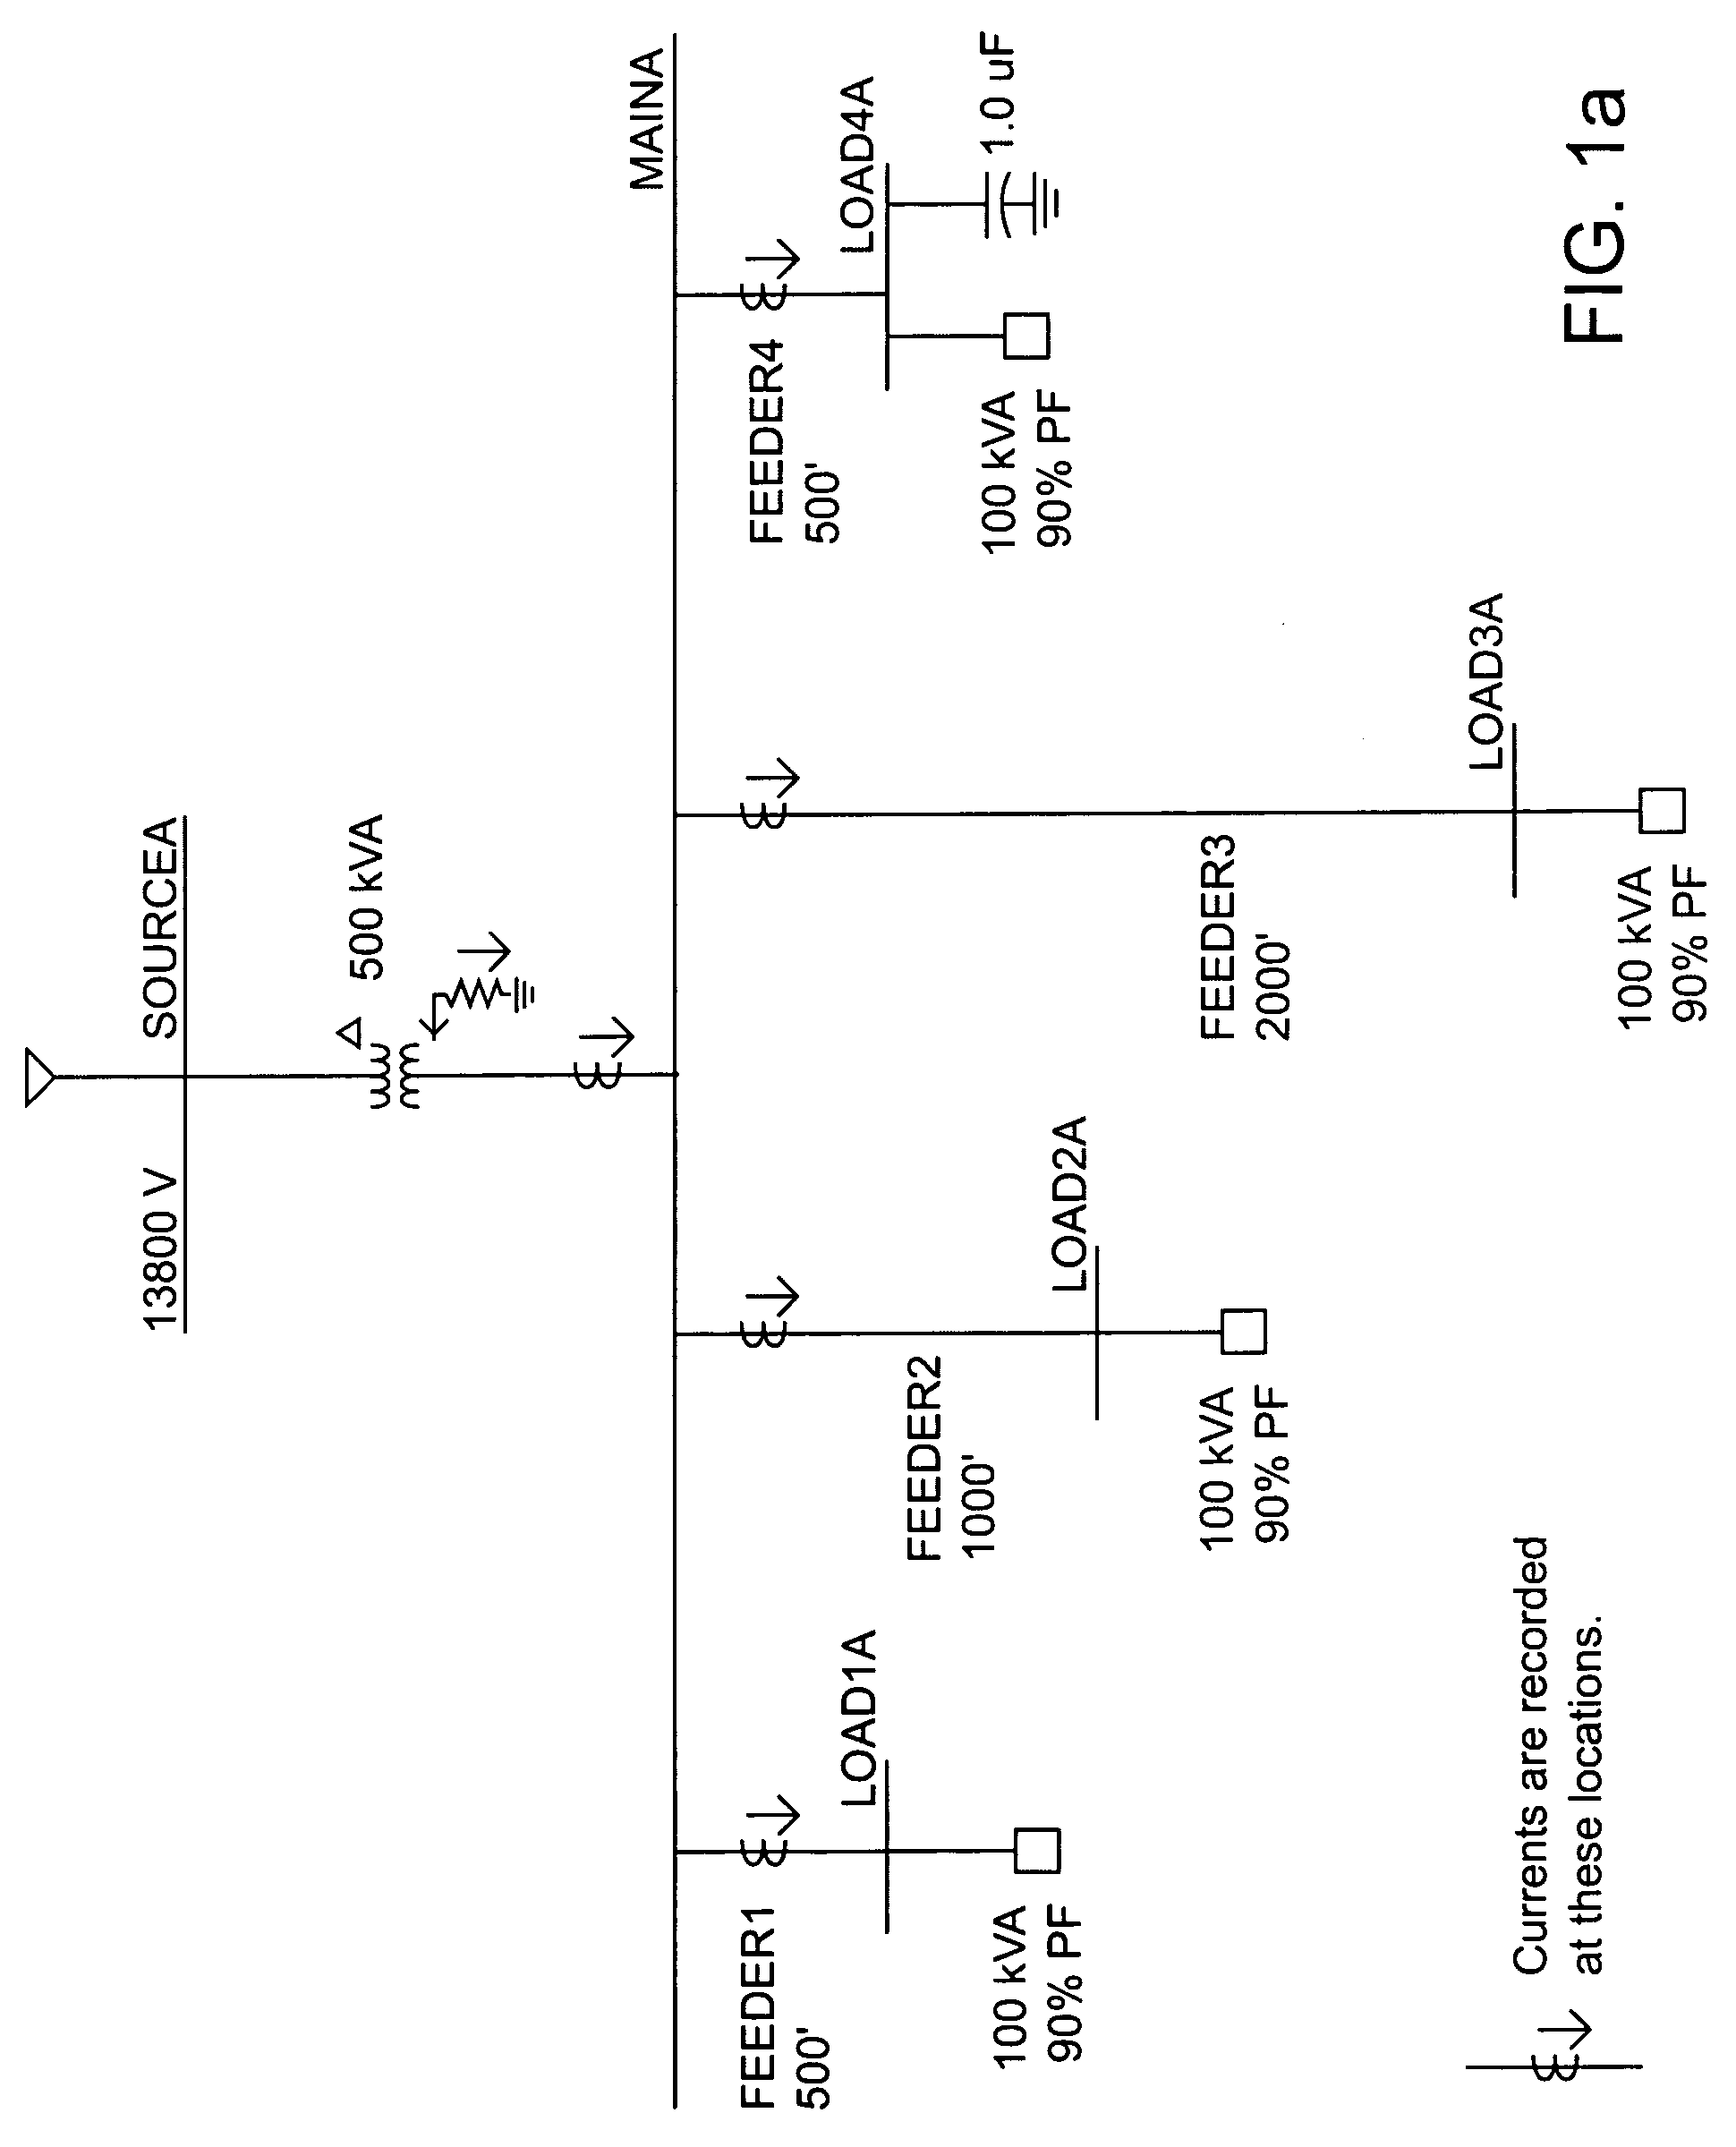 Ground-fault circuit-interrupter system for three-phase electrical power systems